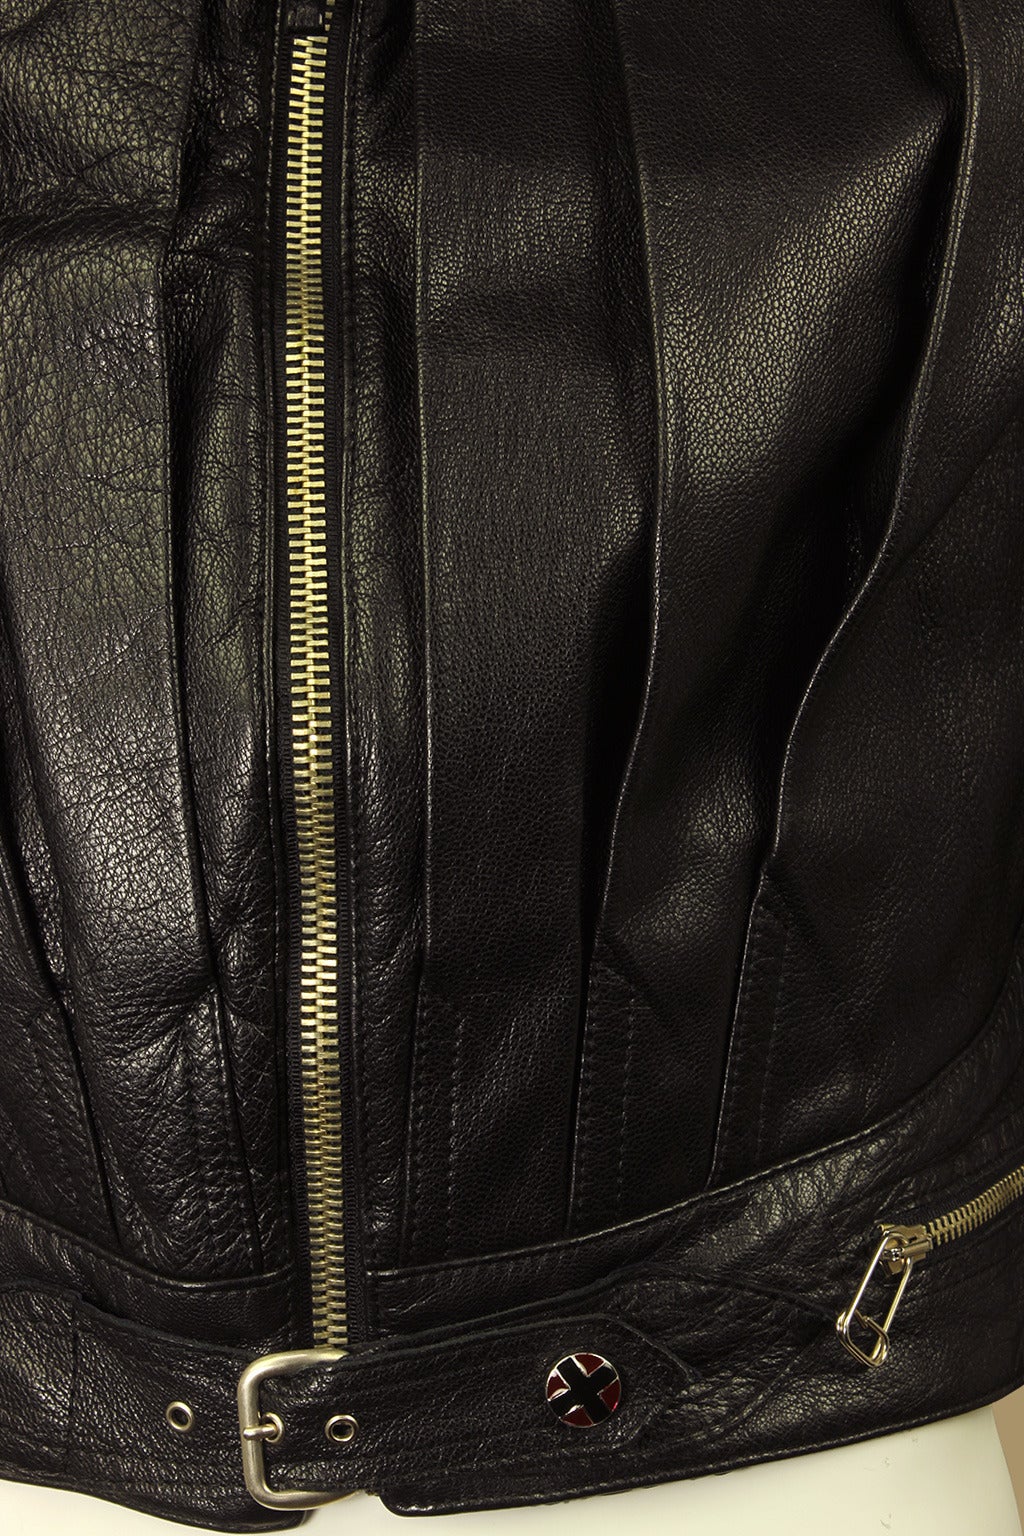 Jean Paul Gaultier Men's 1990s Highly Styled Leather Moto Jacket at 1stdibs